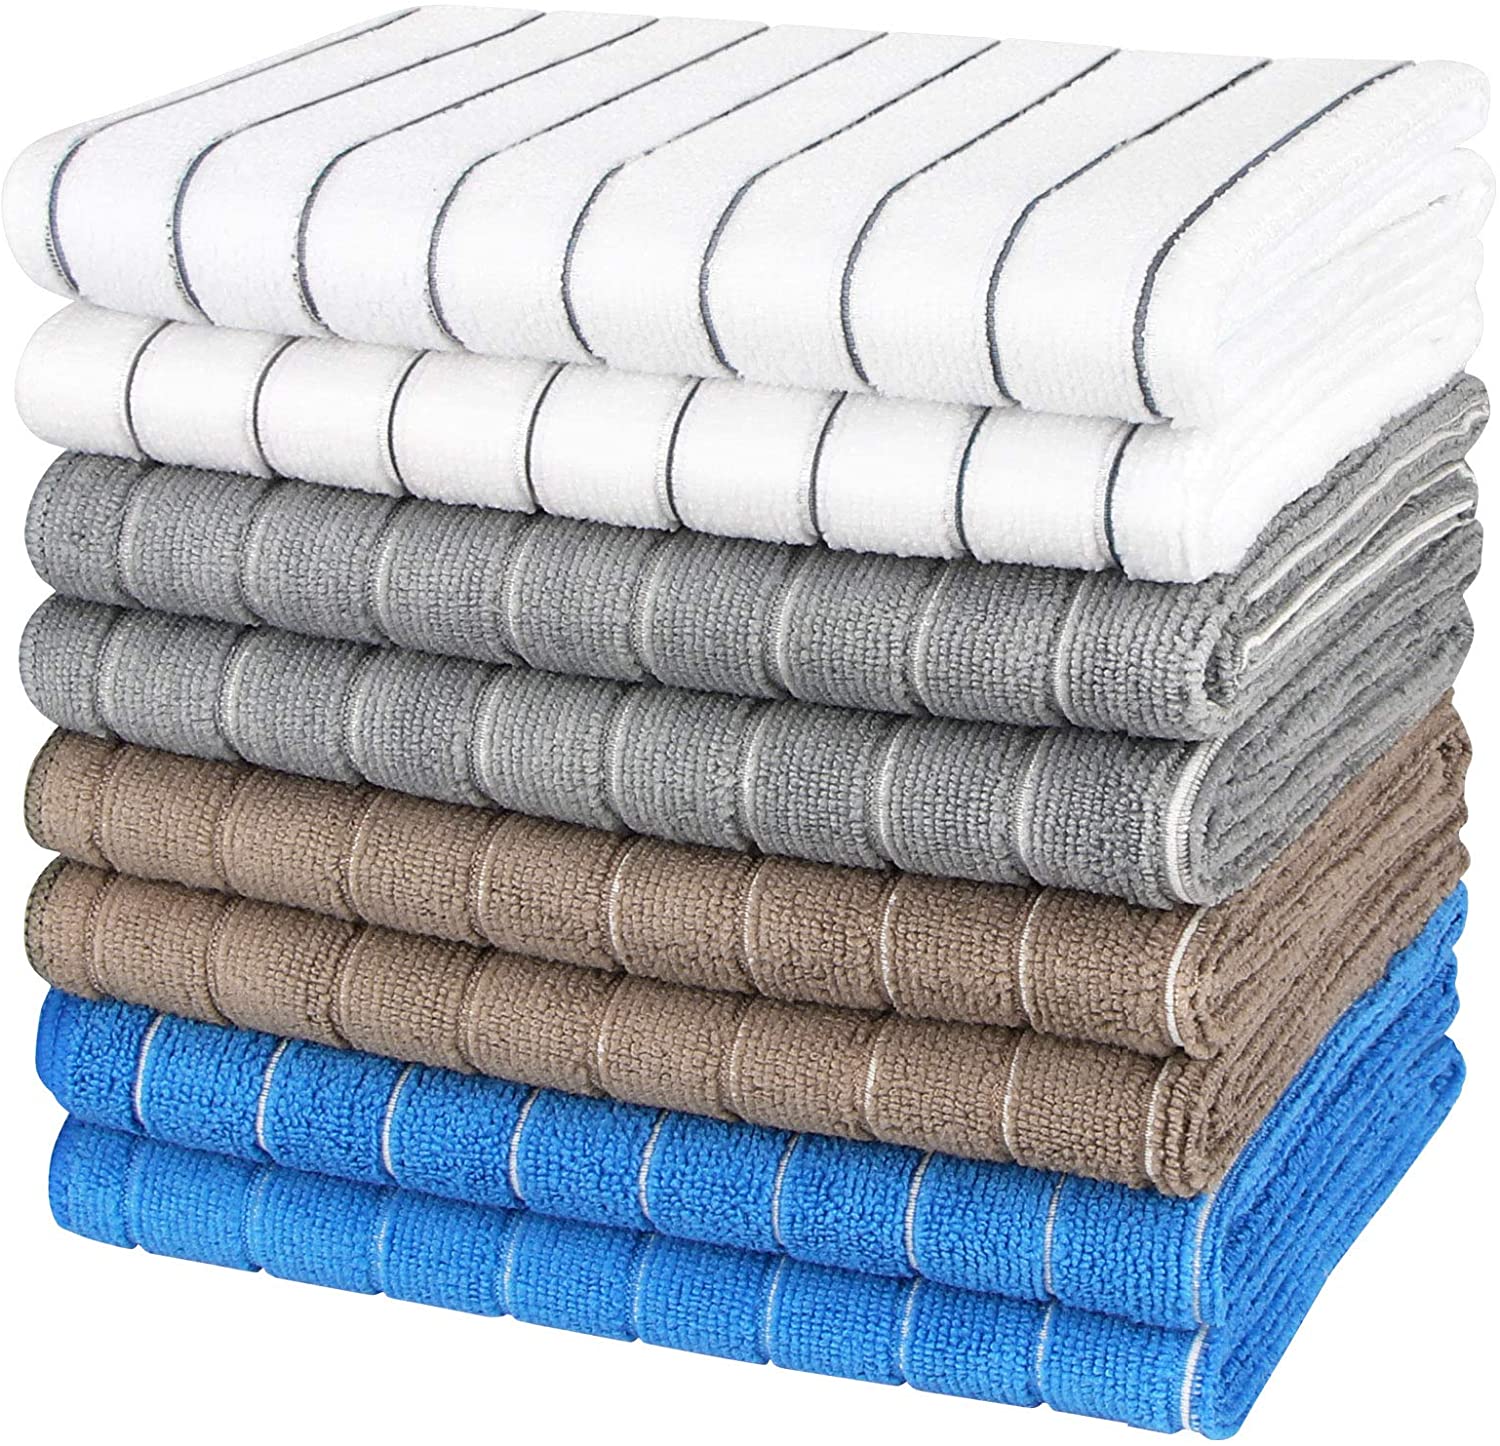 AIDEA Microfiber Cleaning Cloths-8PK, All-Purpose Softer Highly Absorbent,  Lint Free - Streak Free Wash Cloth for House, Kitchen, Car, Window